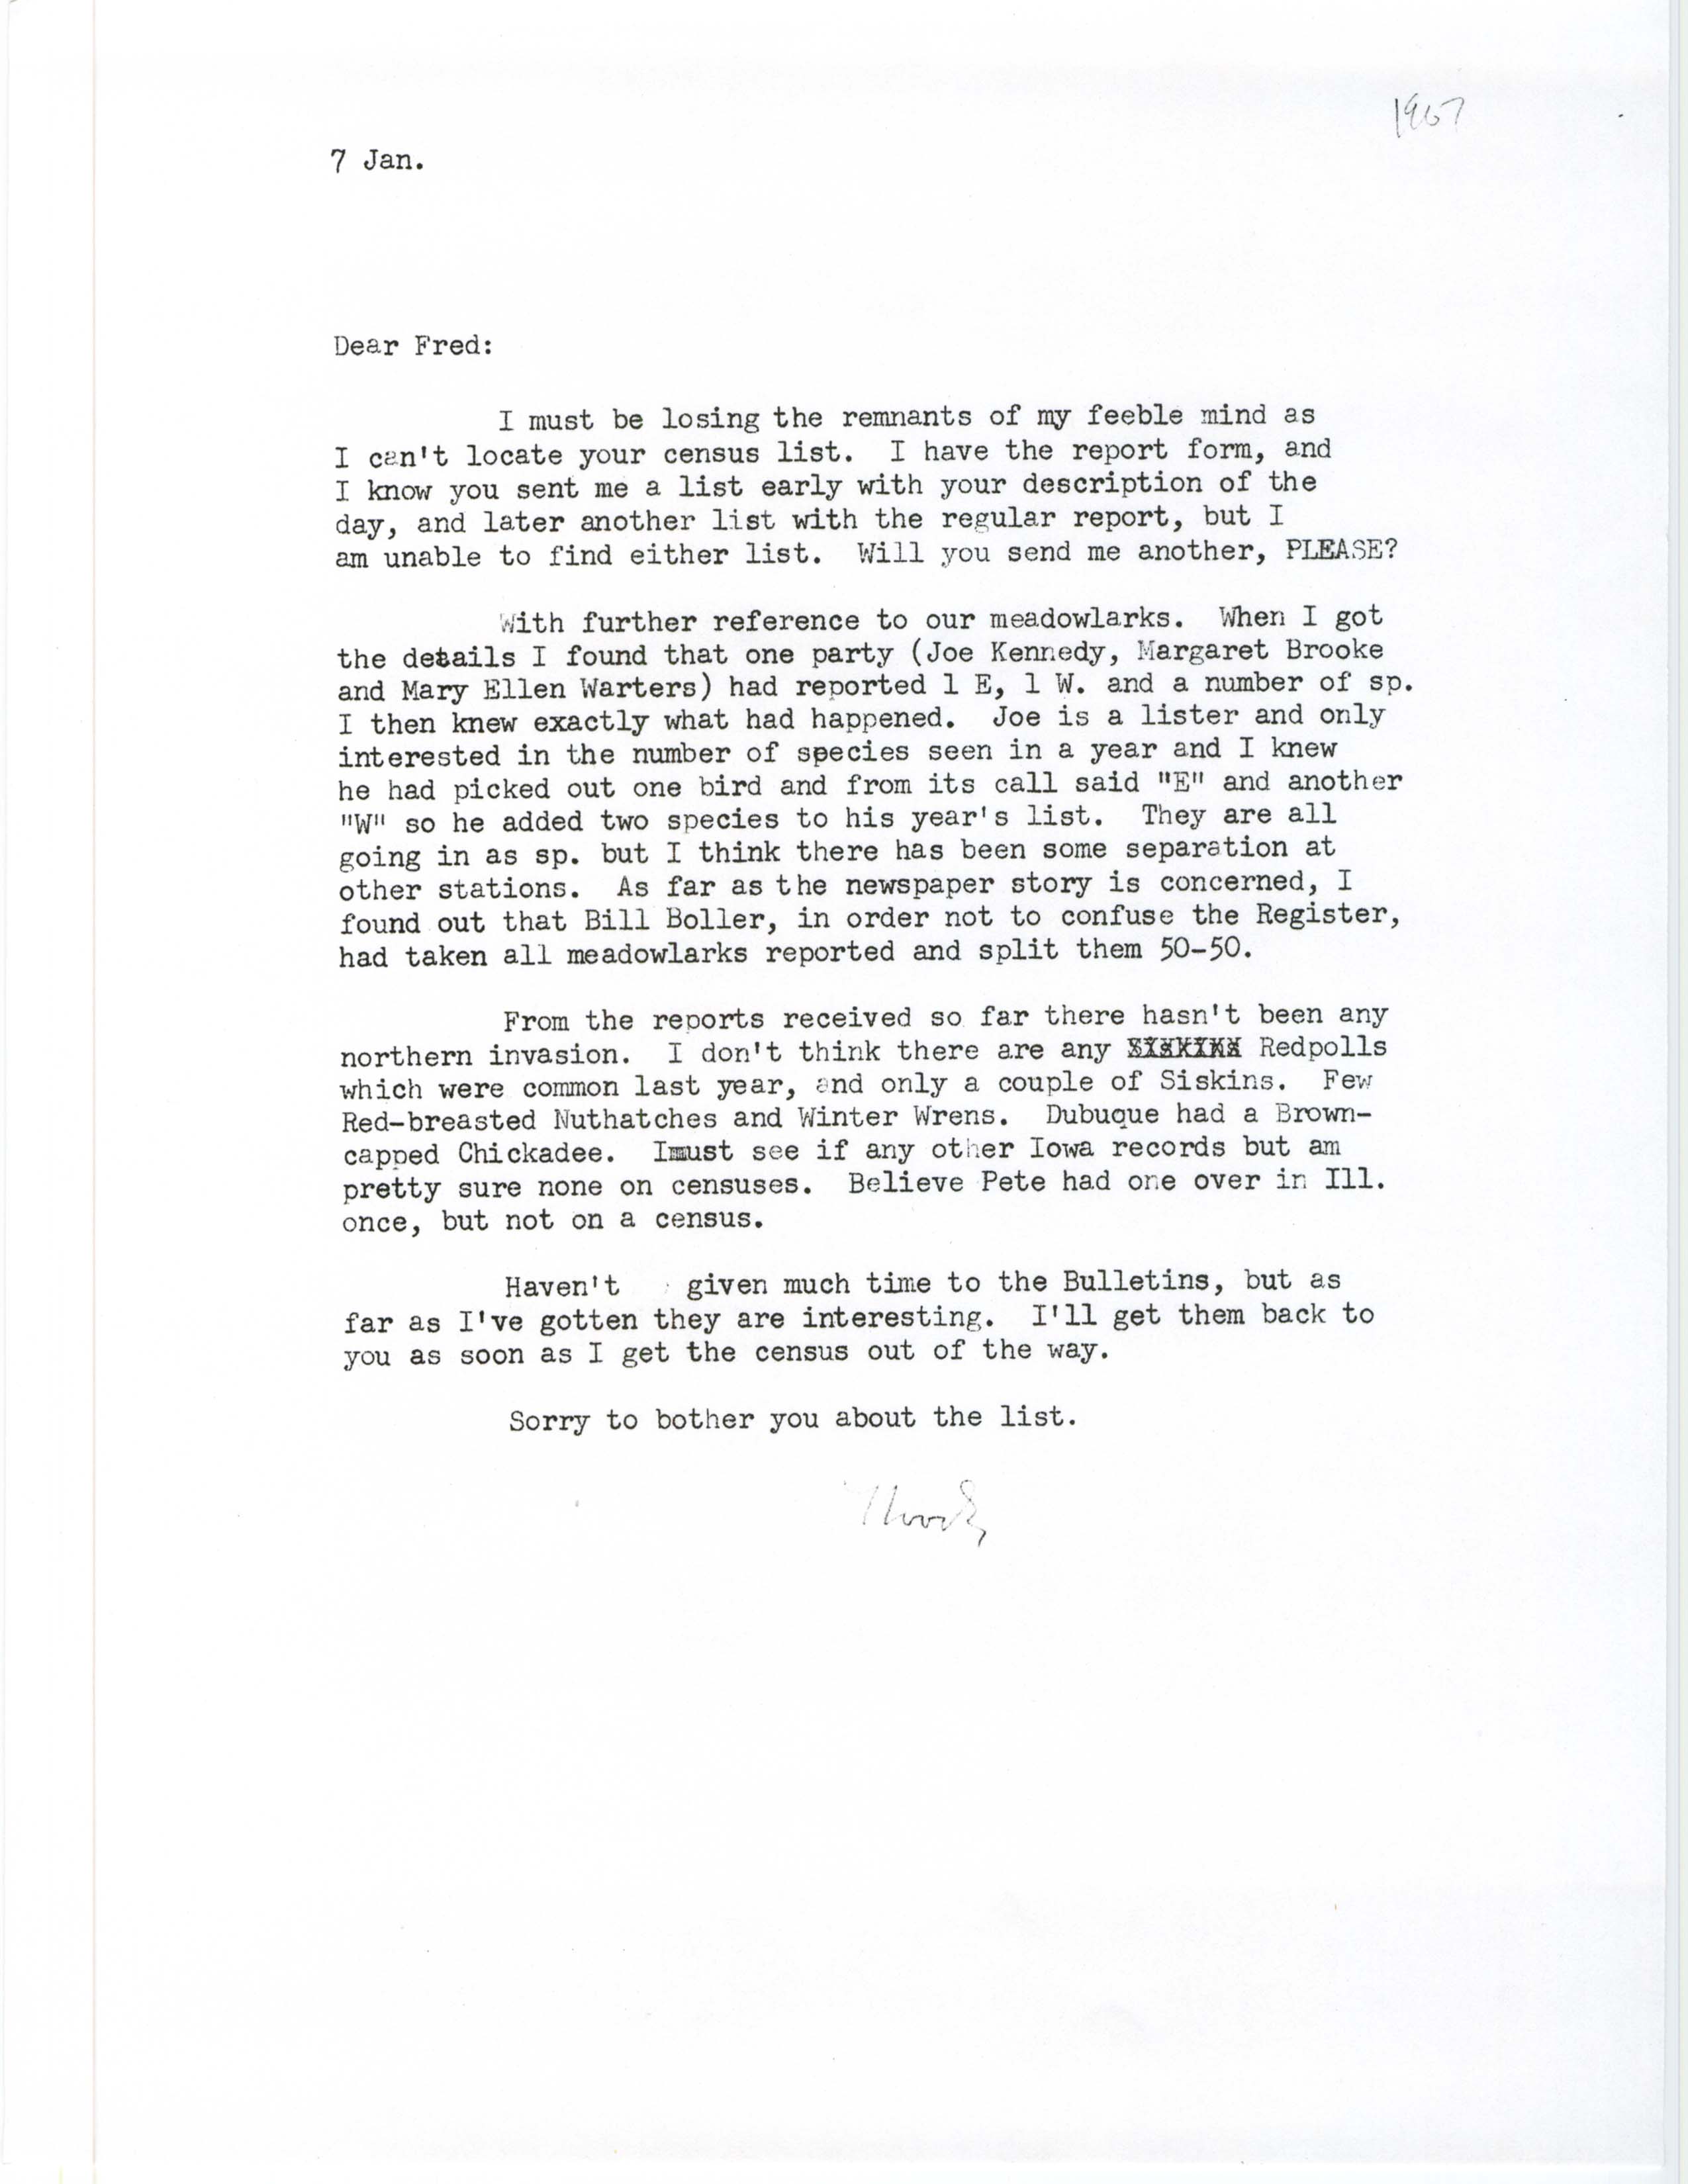 Woodward H. Brown letter to Fred Kent about birding sightings and reports, January 7, 1967